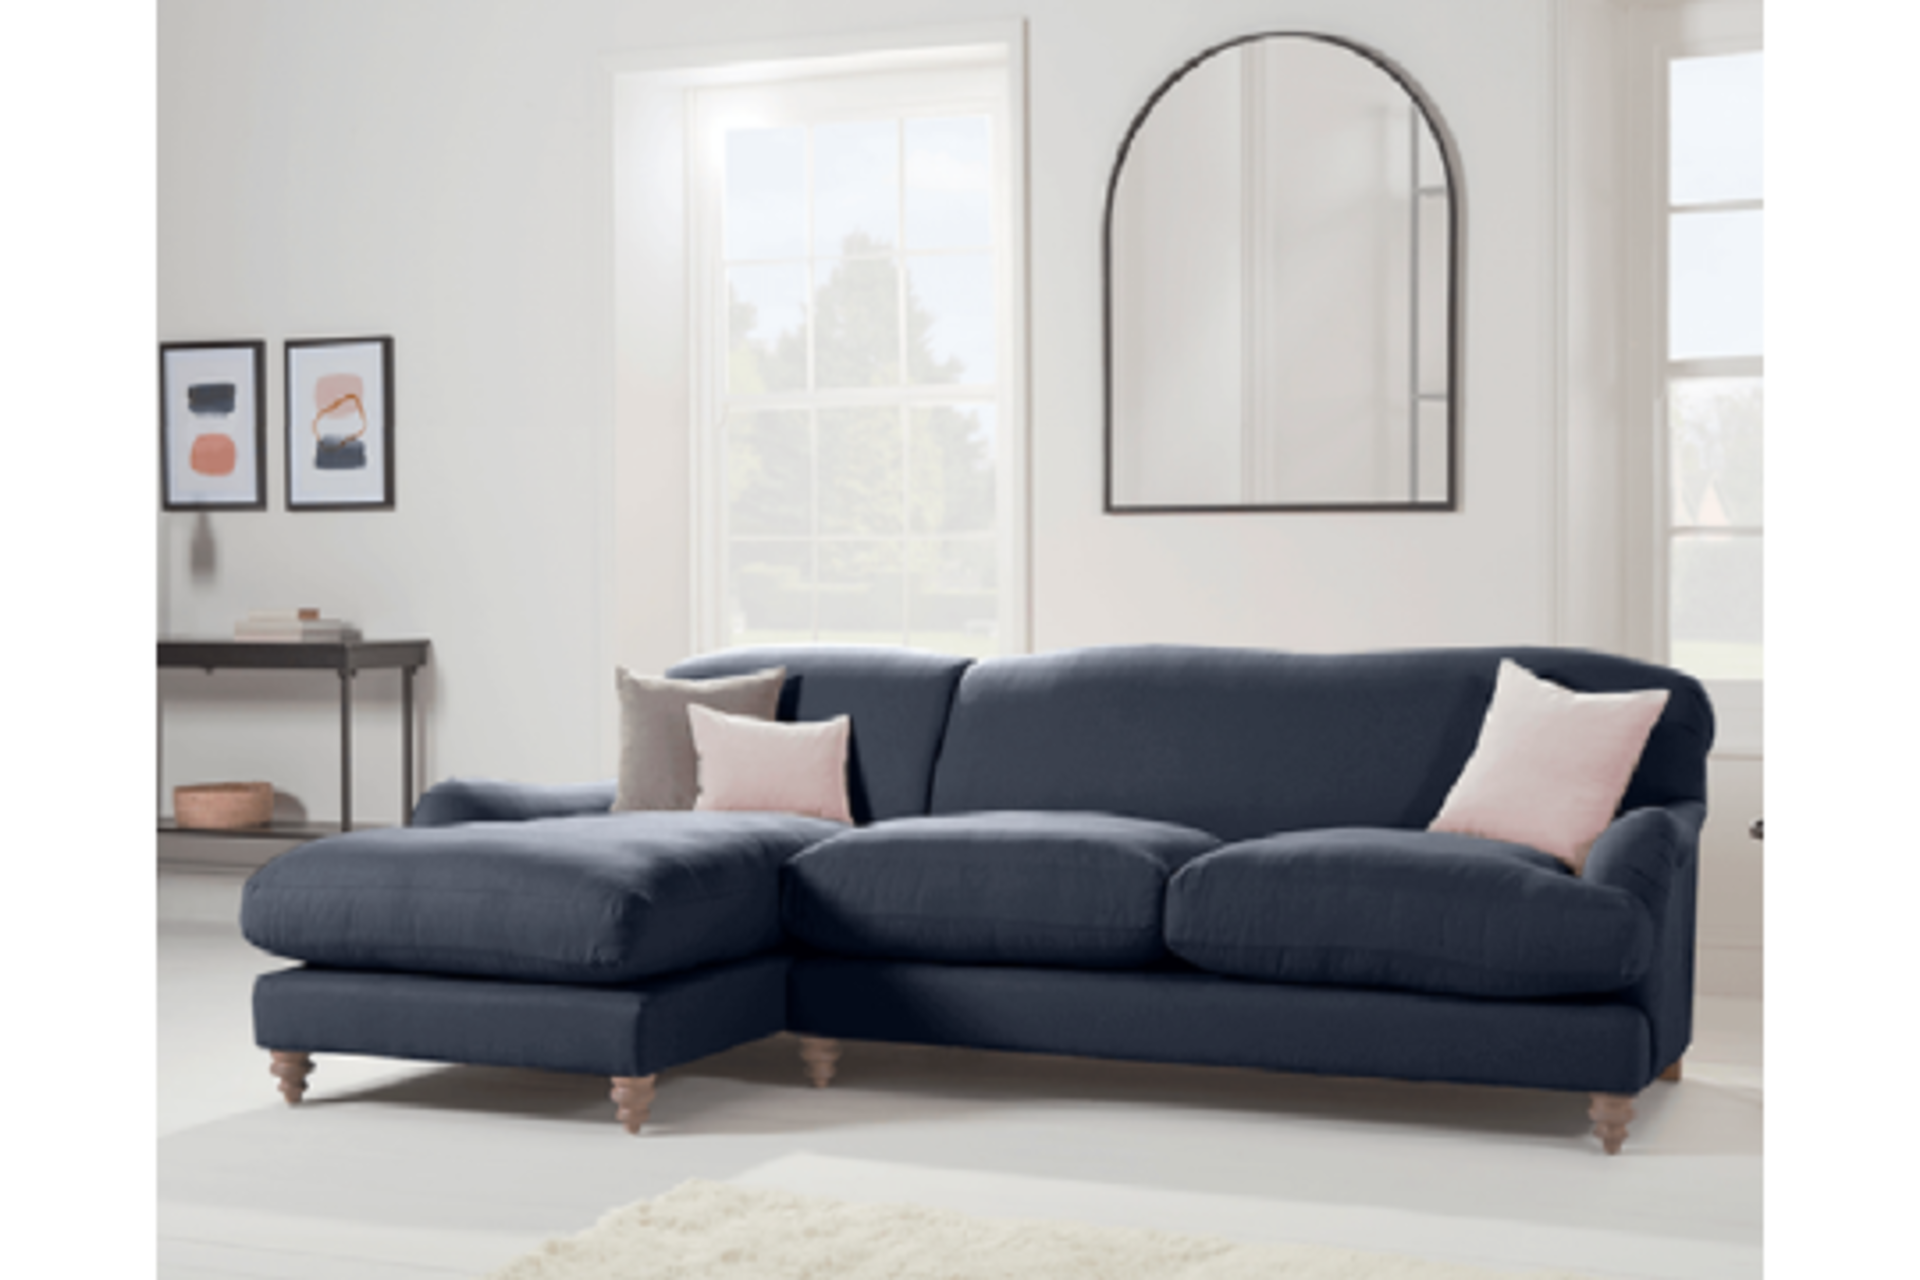 Cosy Grand Chaise Sofa Navy Velvet - Left Hand Facing. - SR5. The Cosy Grand Chaise is an